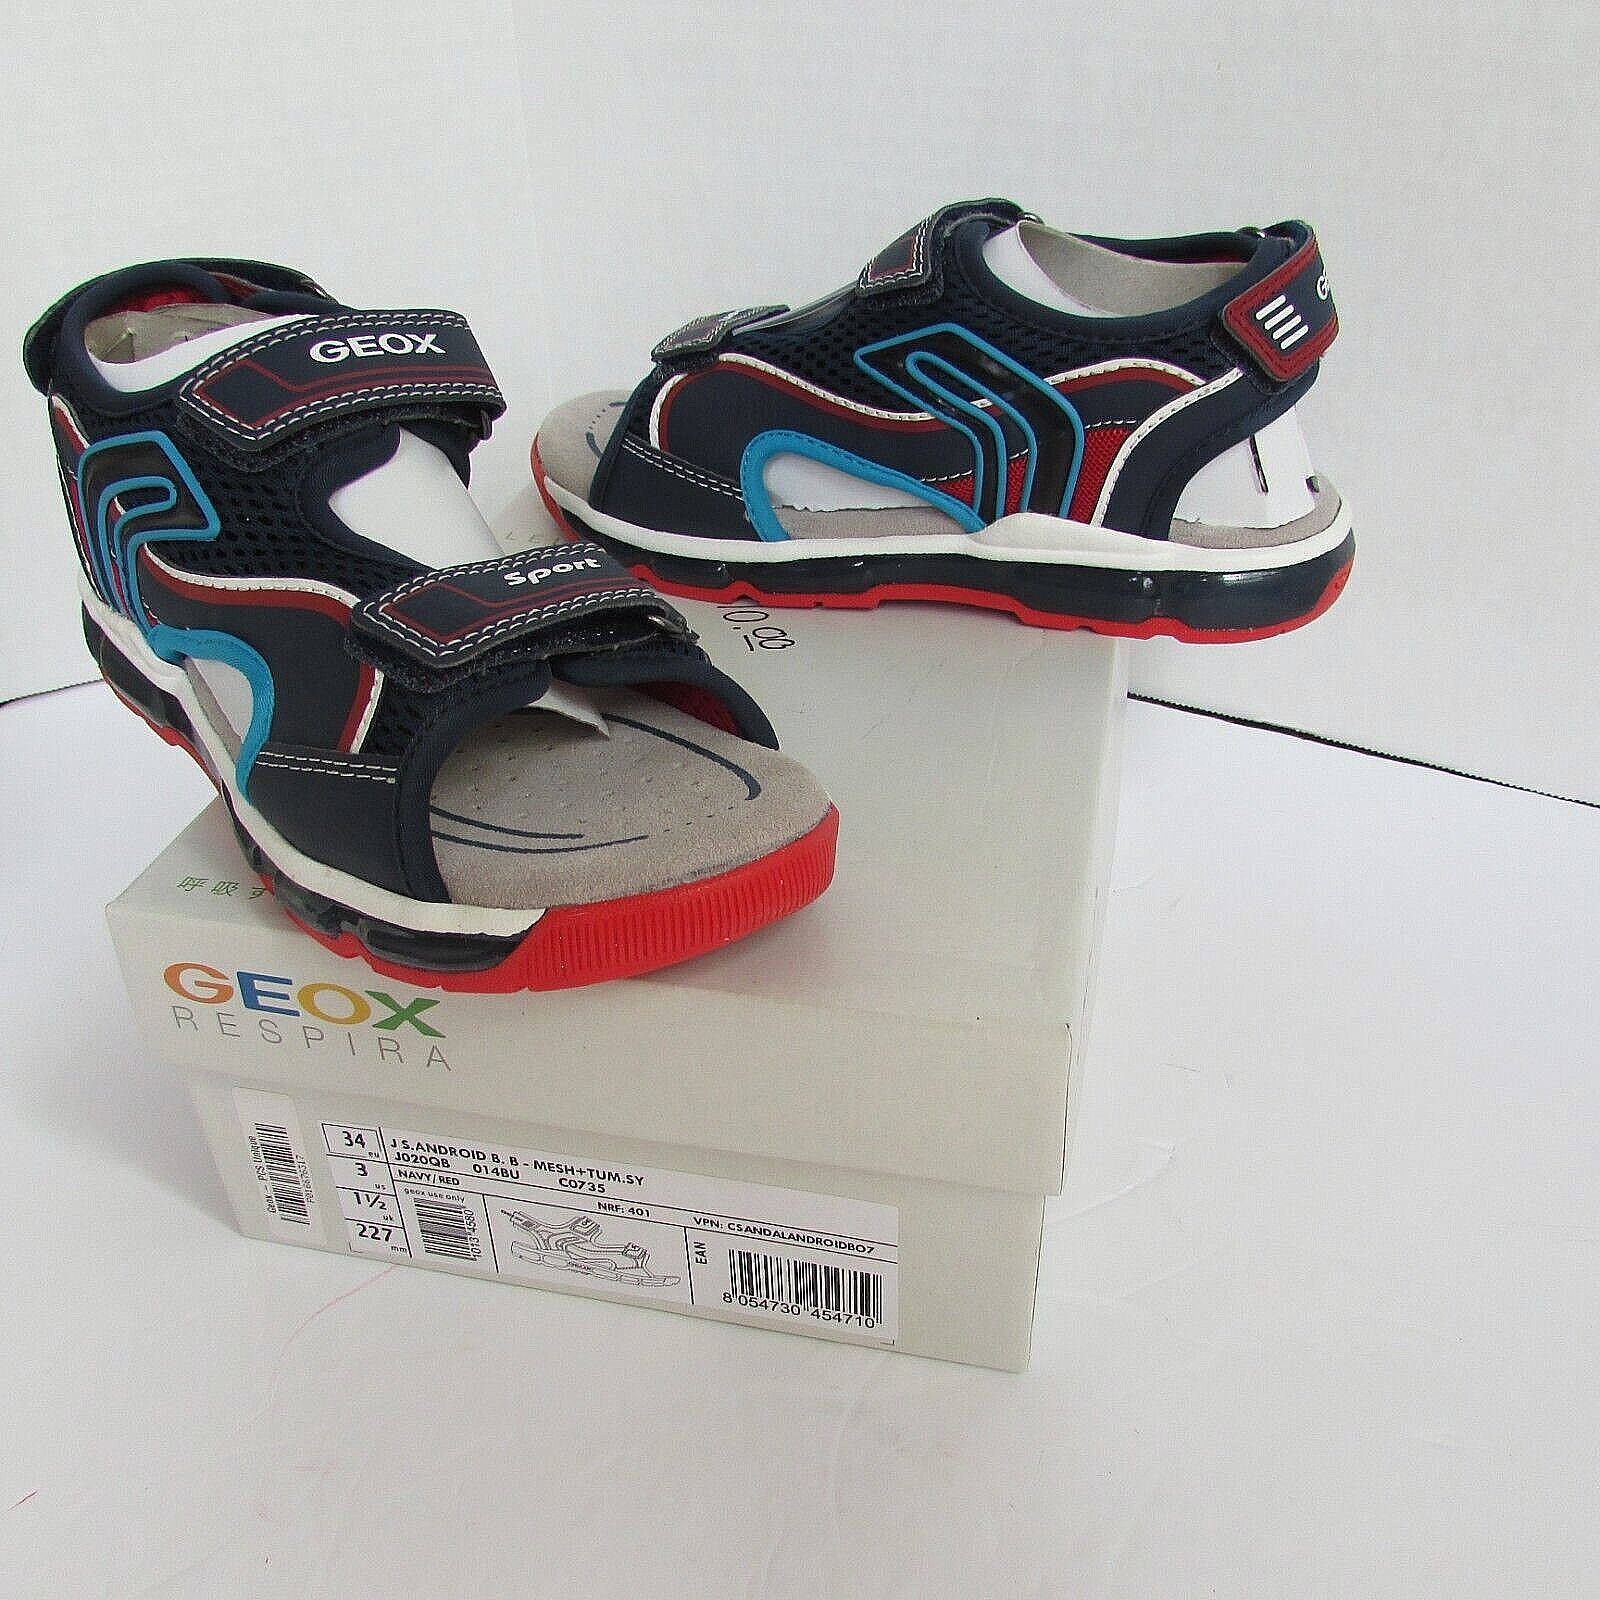 GEOX RESPIRA JS ANDROID B MESH SY BLUE NAVY SANDALS-SZ IN BOX | eBay